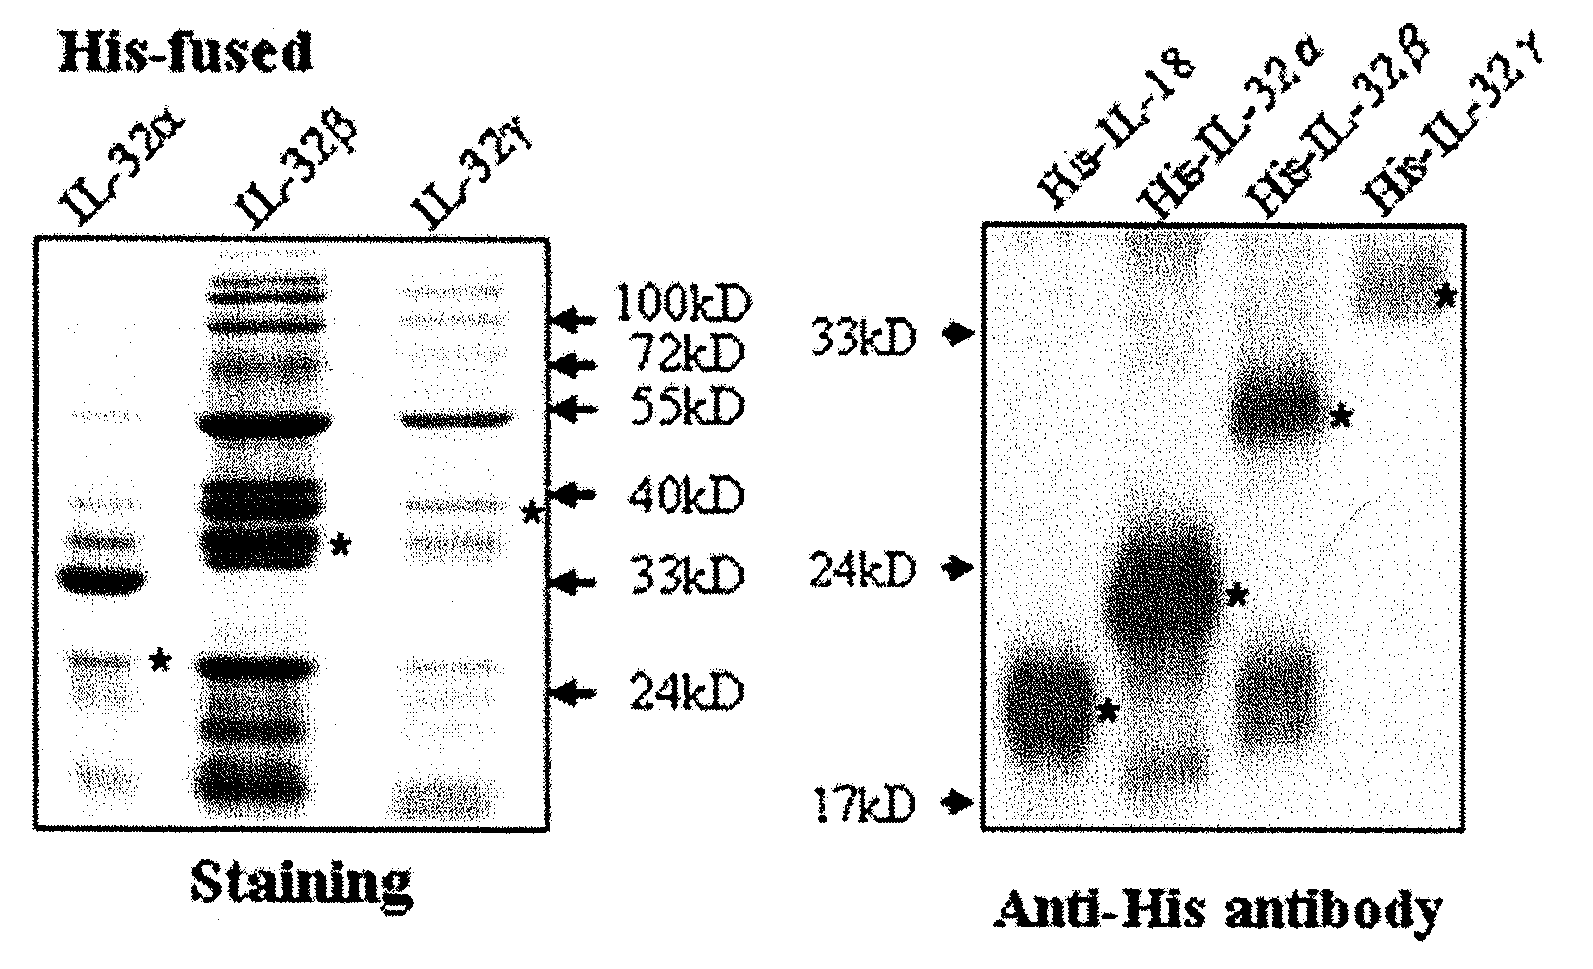 Il-32 monoclonal antibodies and uses thereof